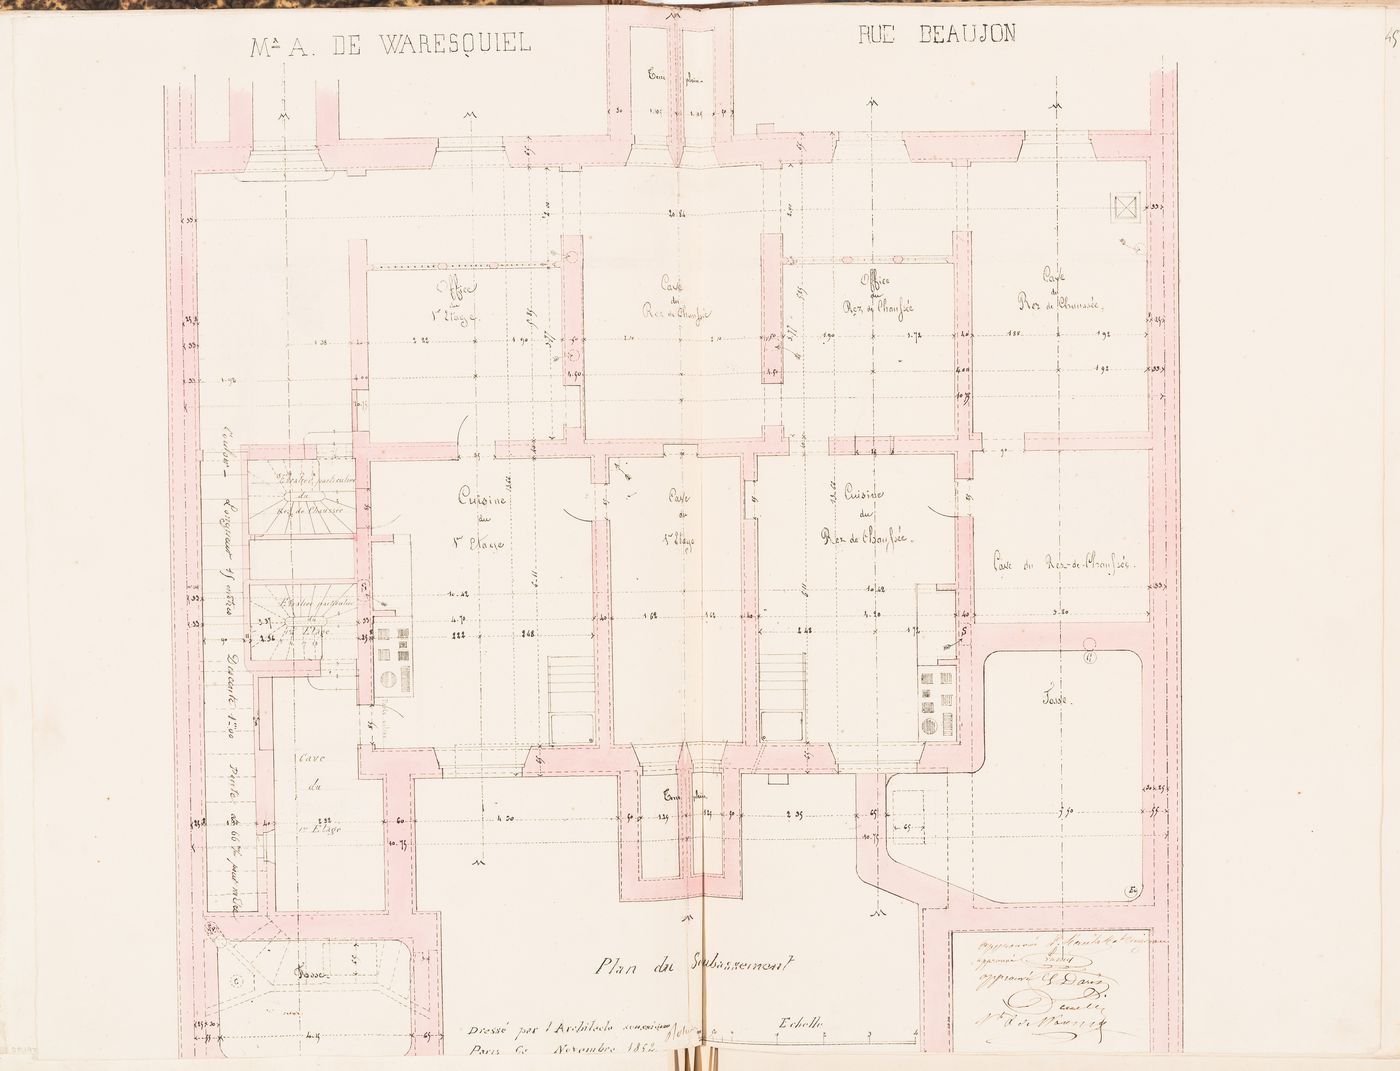 Contract drawing for a house for Monsieur A. Waresquiel, rue Beaujon, Paris: Plan for the "soubassement"